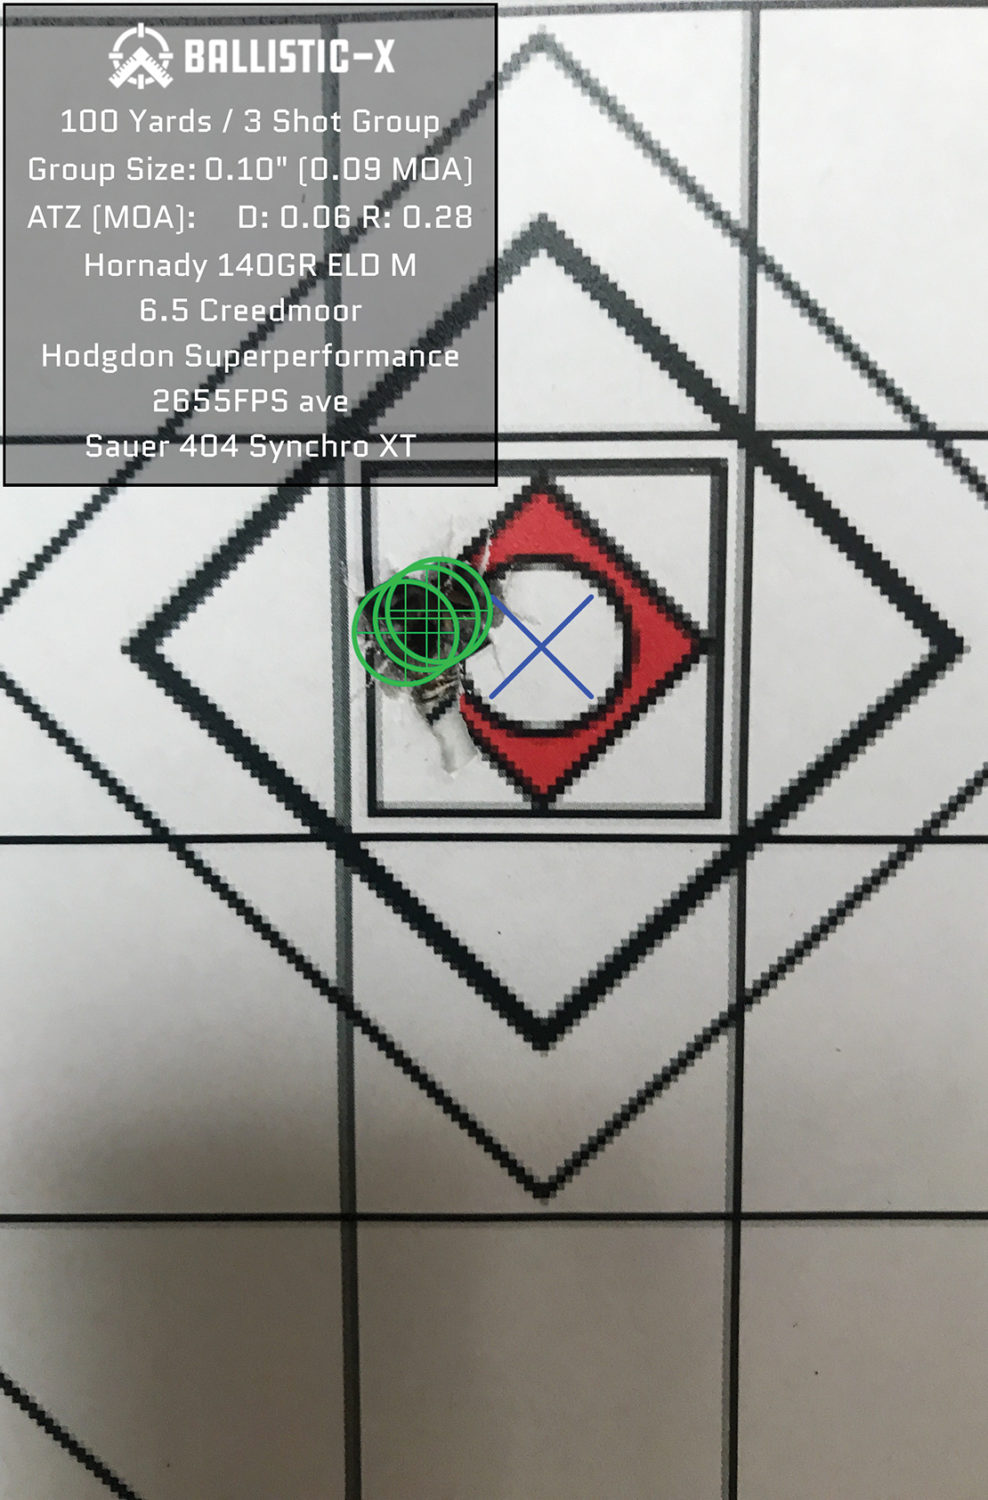 The 140GR ELD-MON produced a pea-sized grouping and showed outstanding consistency